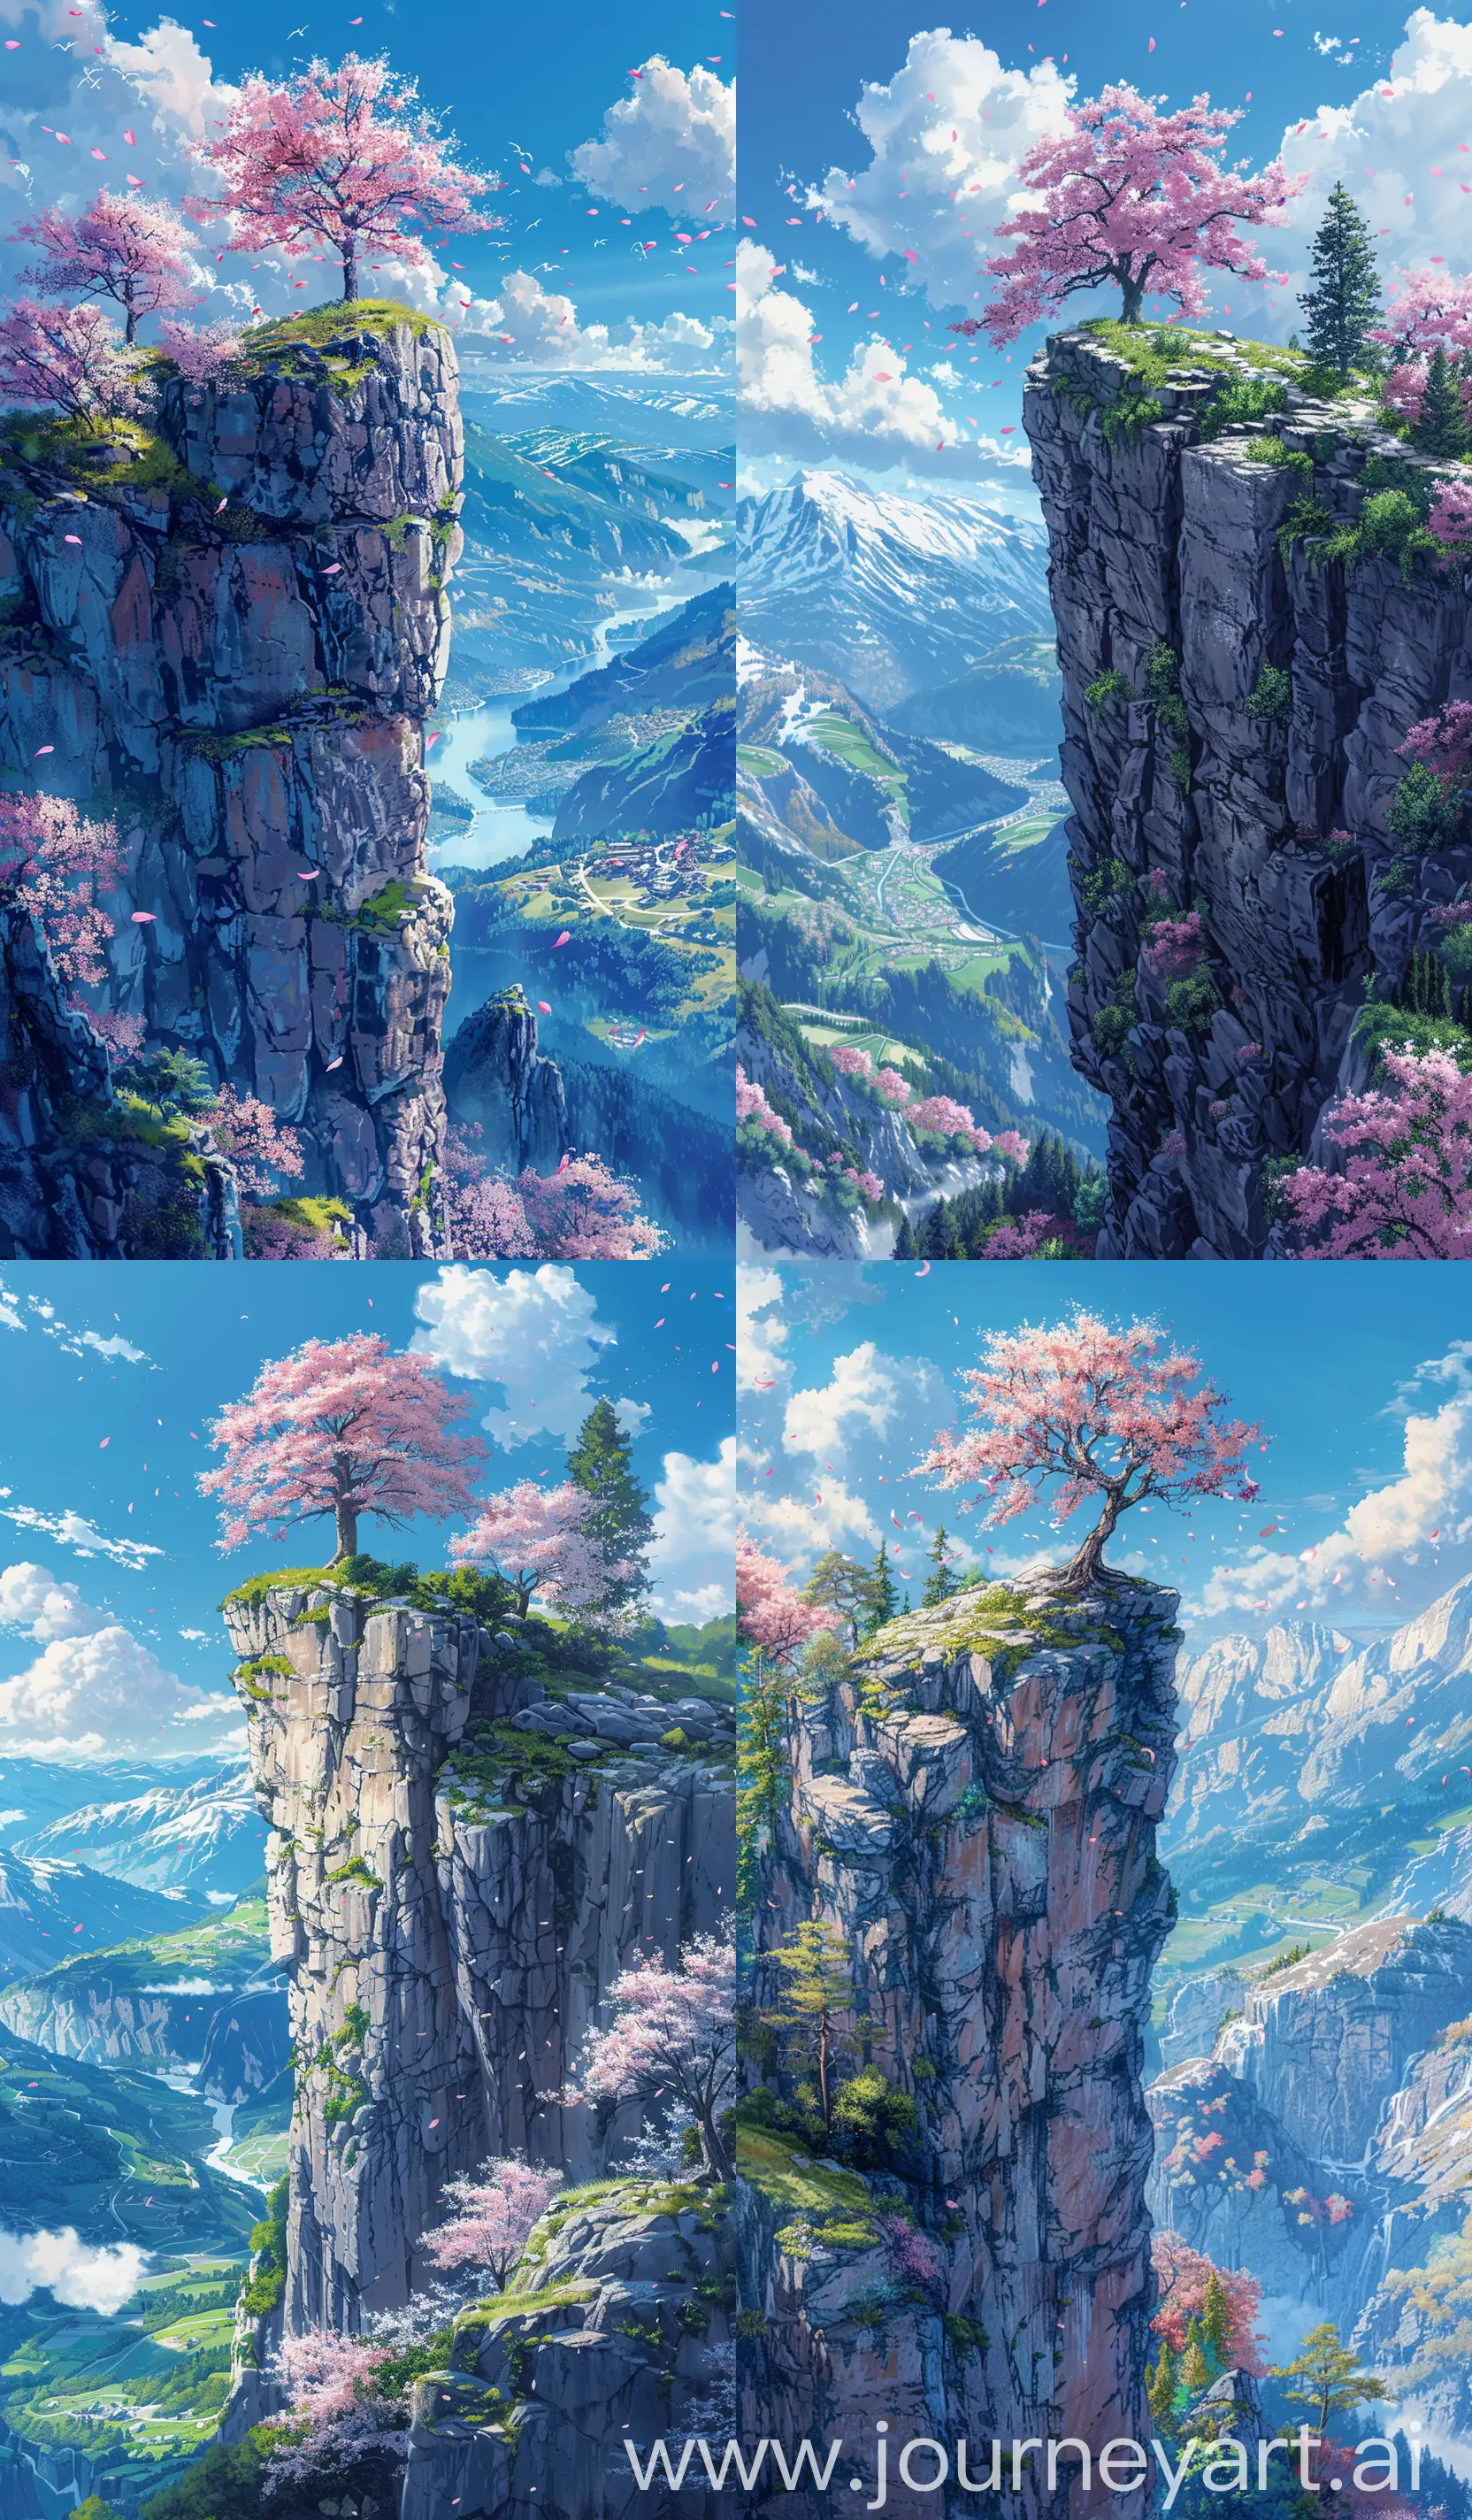 Serene-Anime-Landscape-Cherry-Blossom-Tree-atop-Rock-Cliff-in-Spring